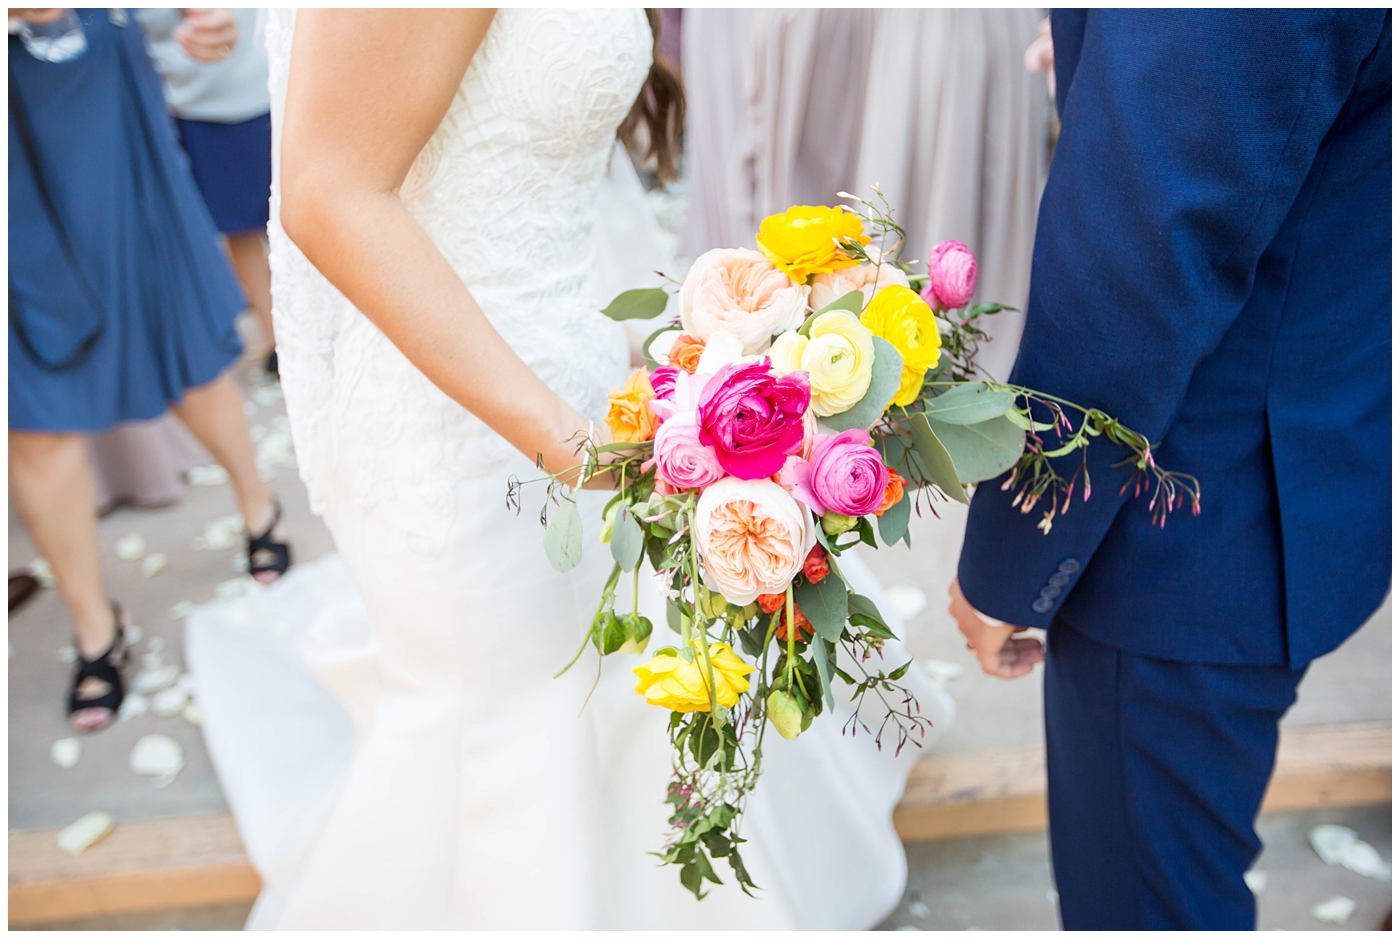 bride in lace cap sleeve wedding dress with bright pink, yellow and green flower bouquets fwith groom in blue suit on wedding day portrait at church